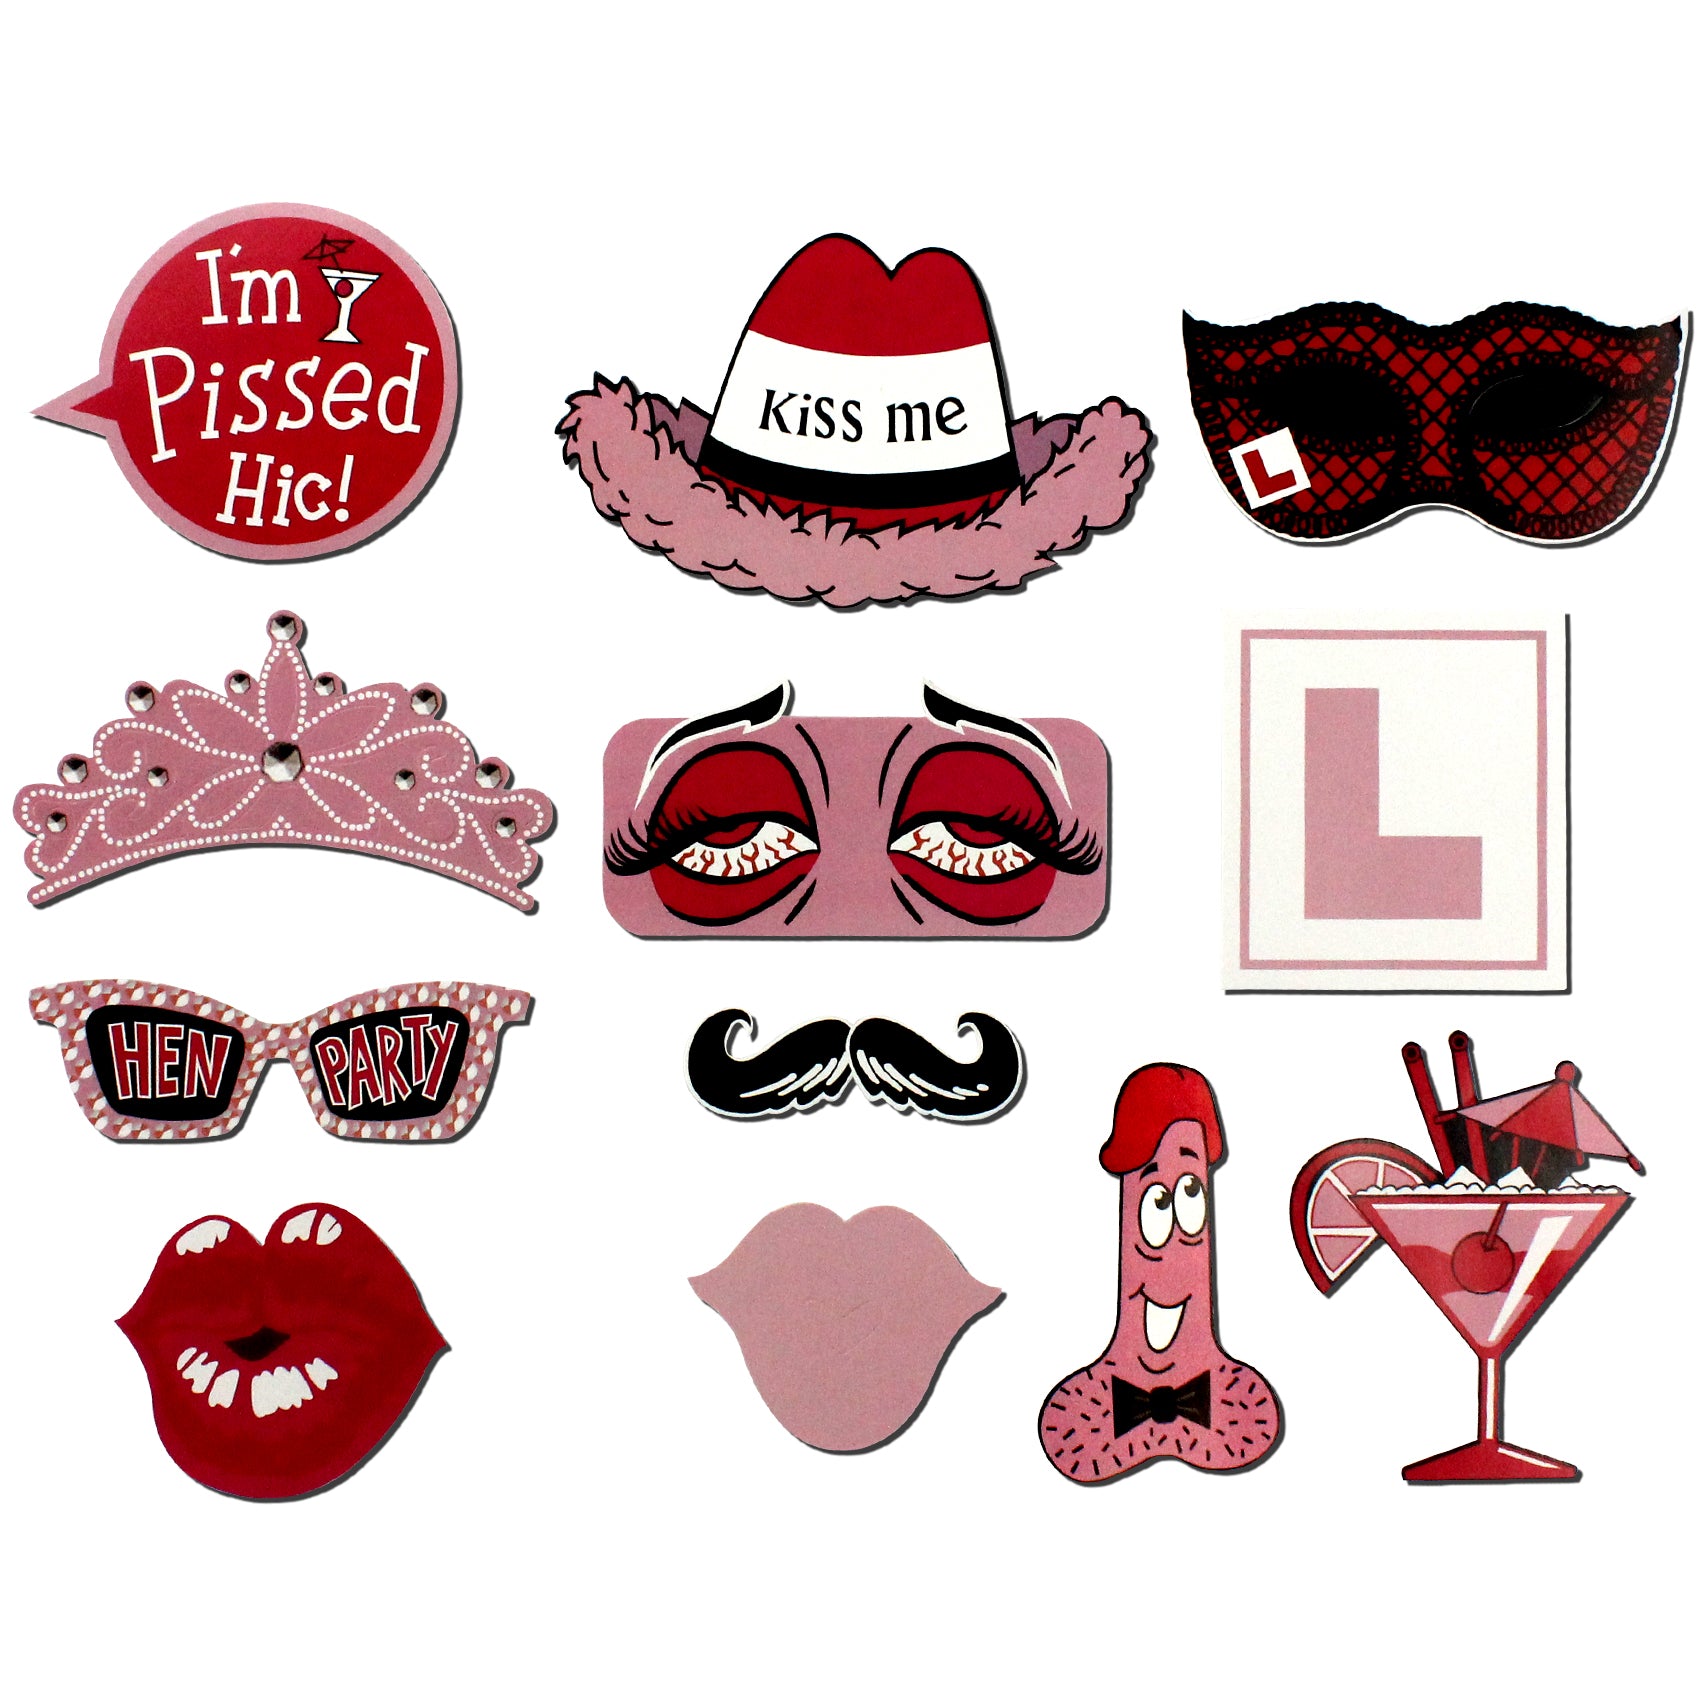 Naughty Hen Night Bachelorette Party Photo Booth Props 12 Count